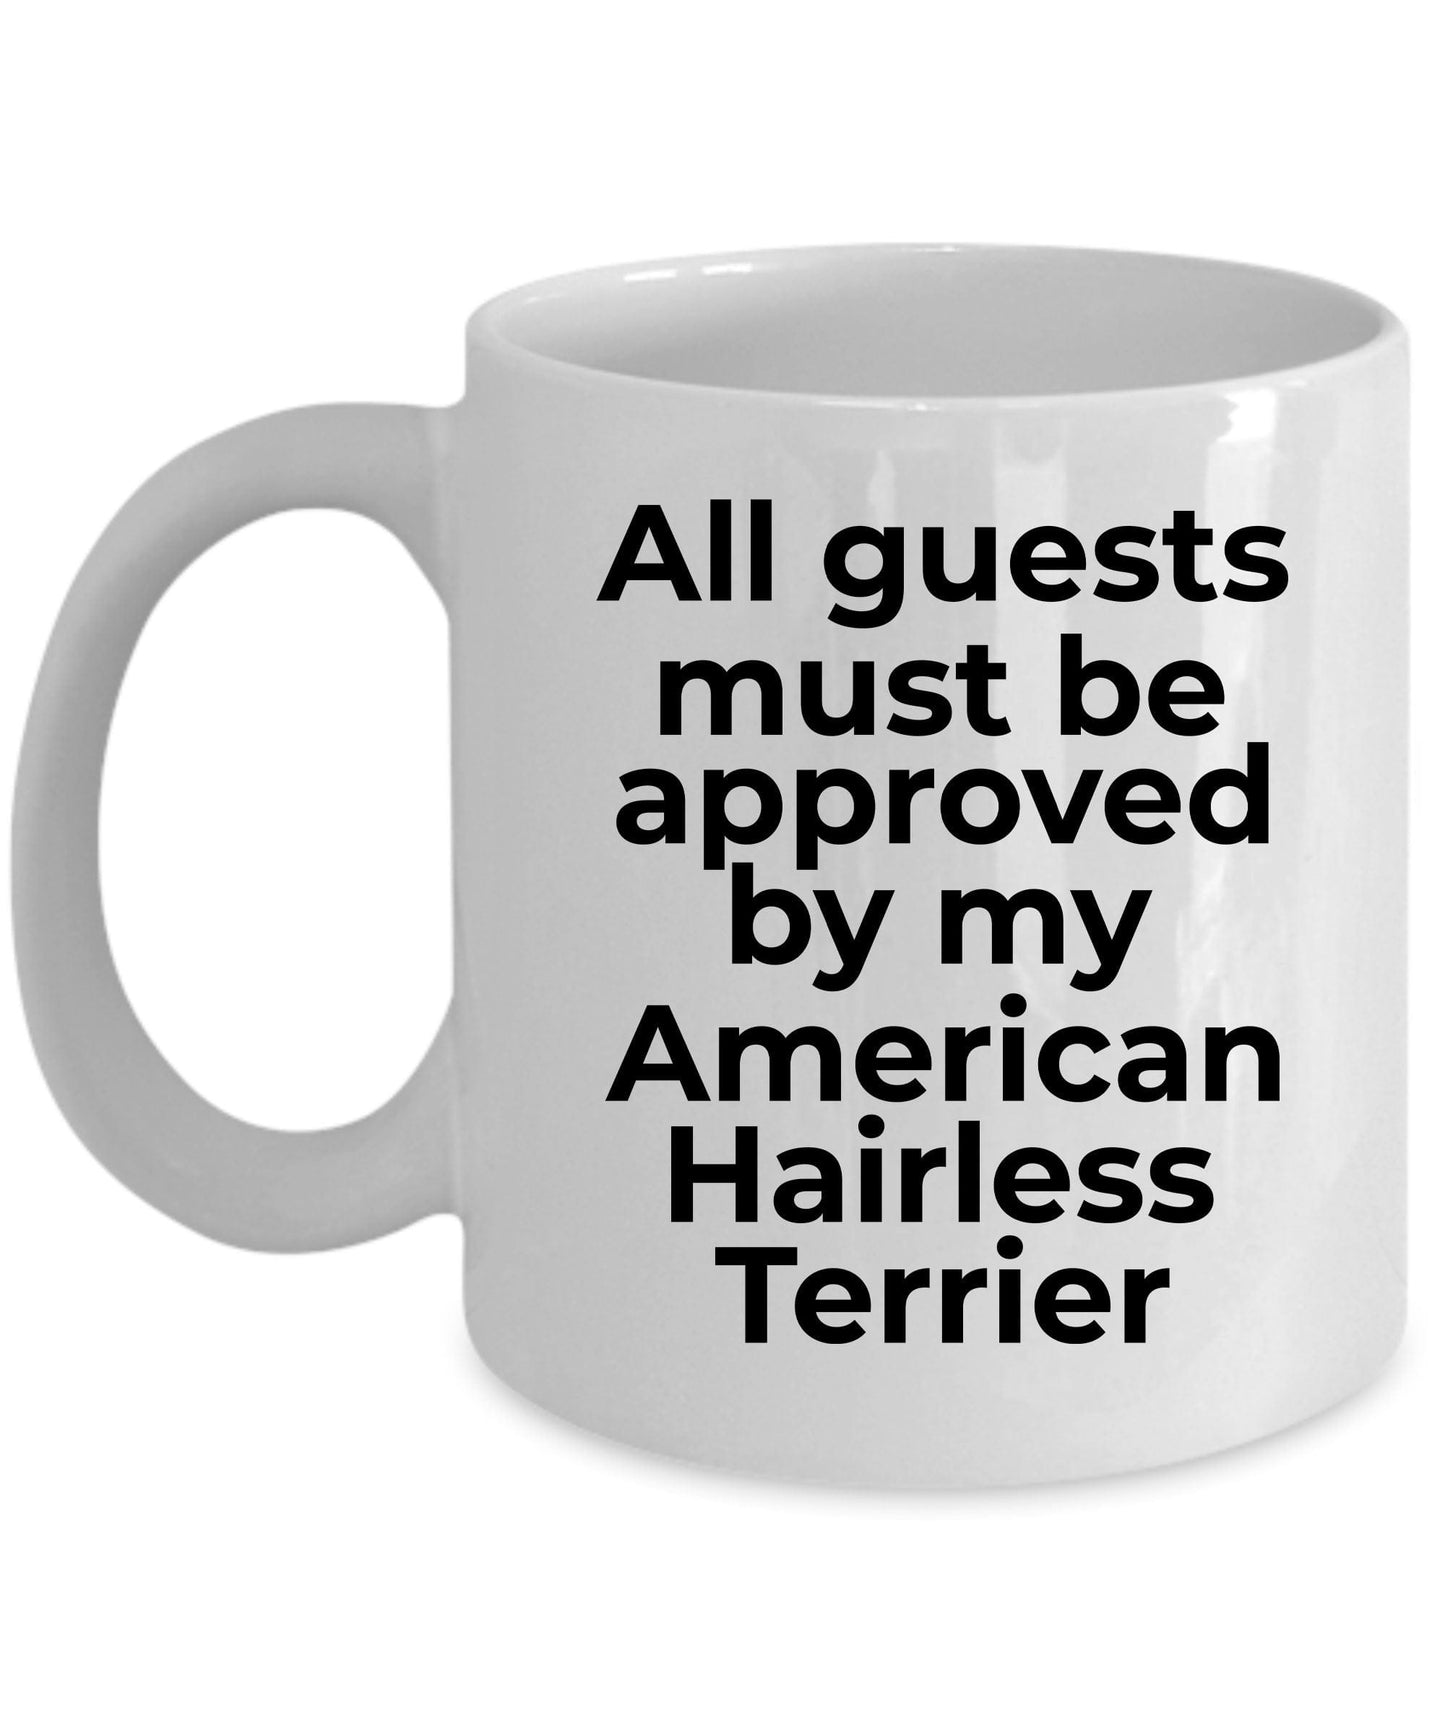 American Hairless Terrier Funny Dog Coffee Mug - Guests must be approved by my American Hairless Terrier